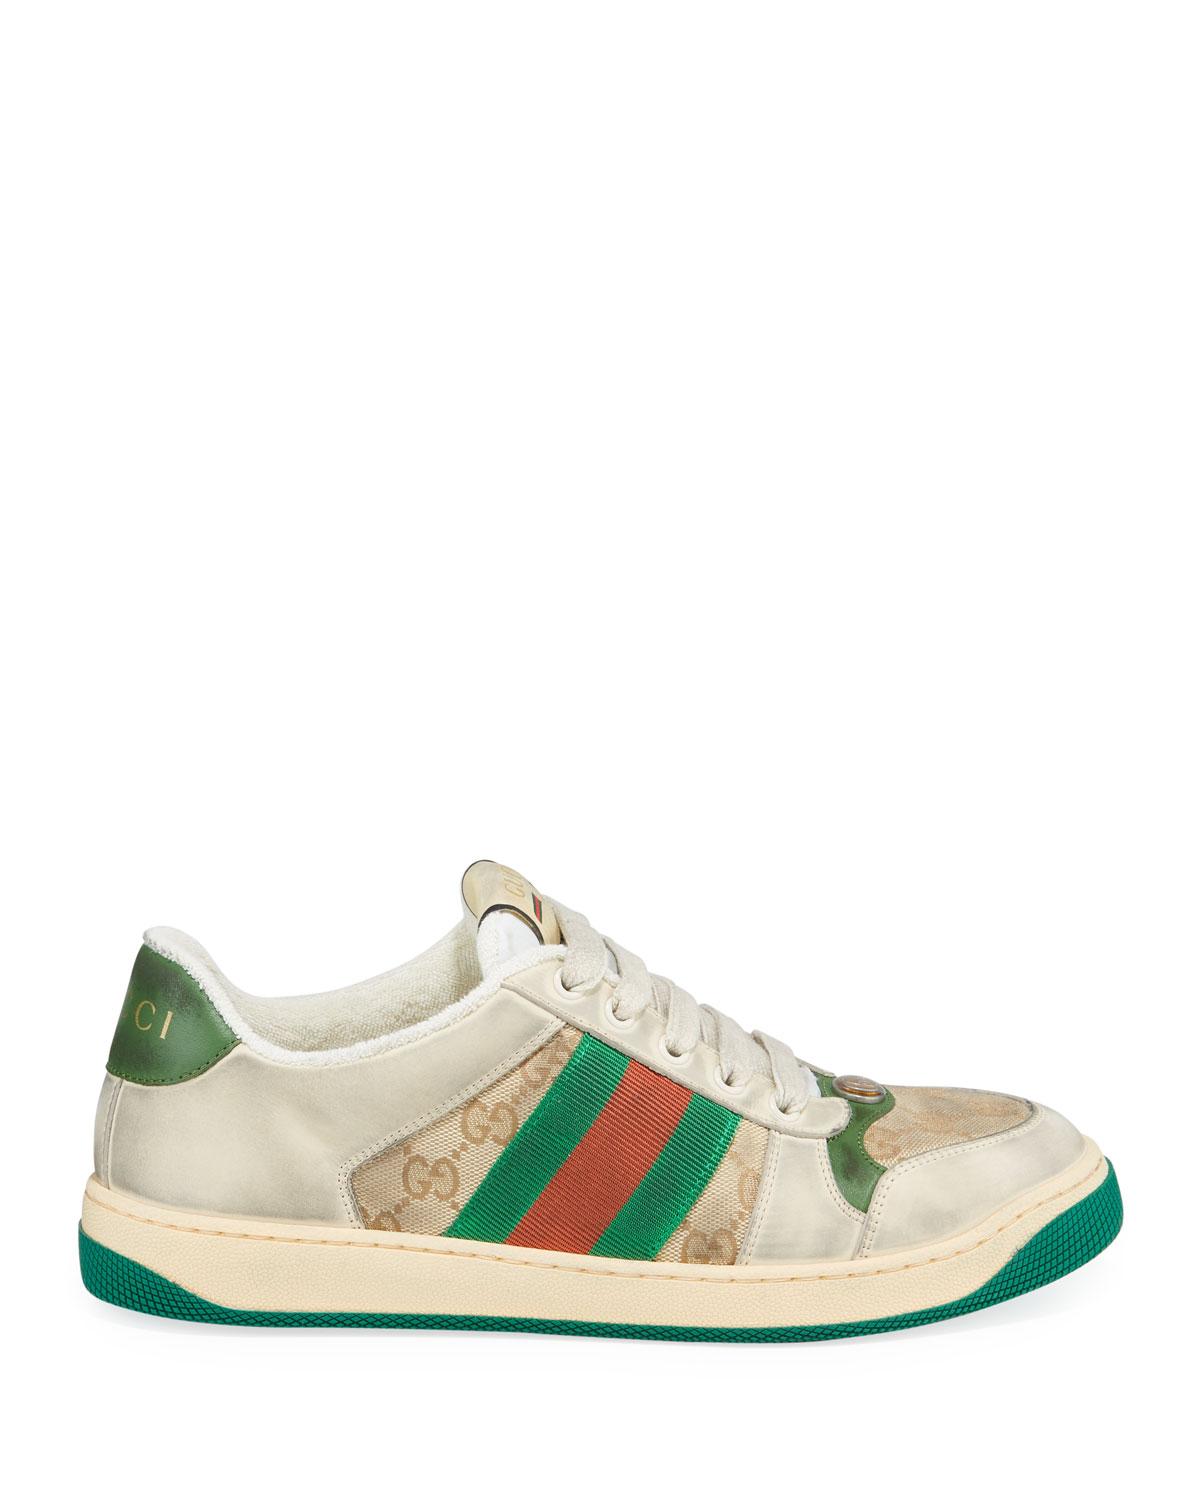 Gucci Canvas Virtus Distressed Leather And Webbing Sneakers in White ...